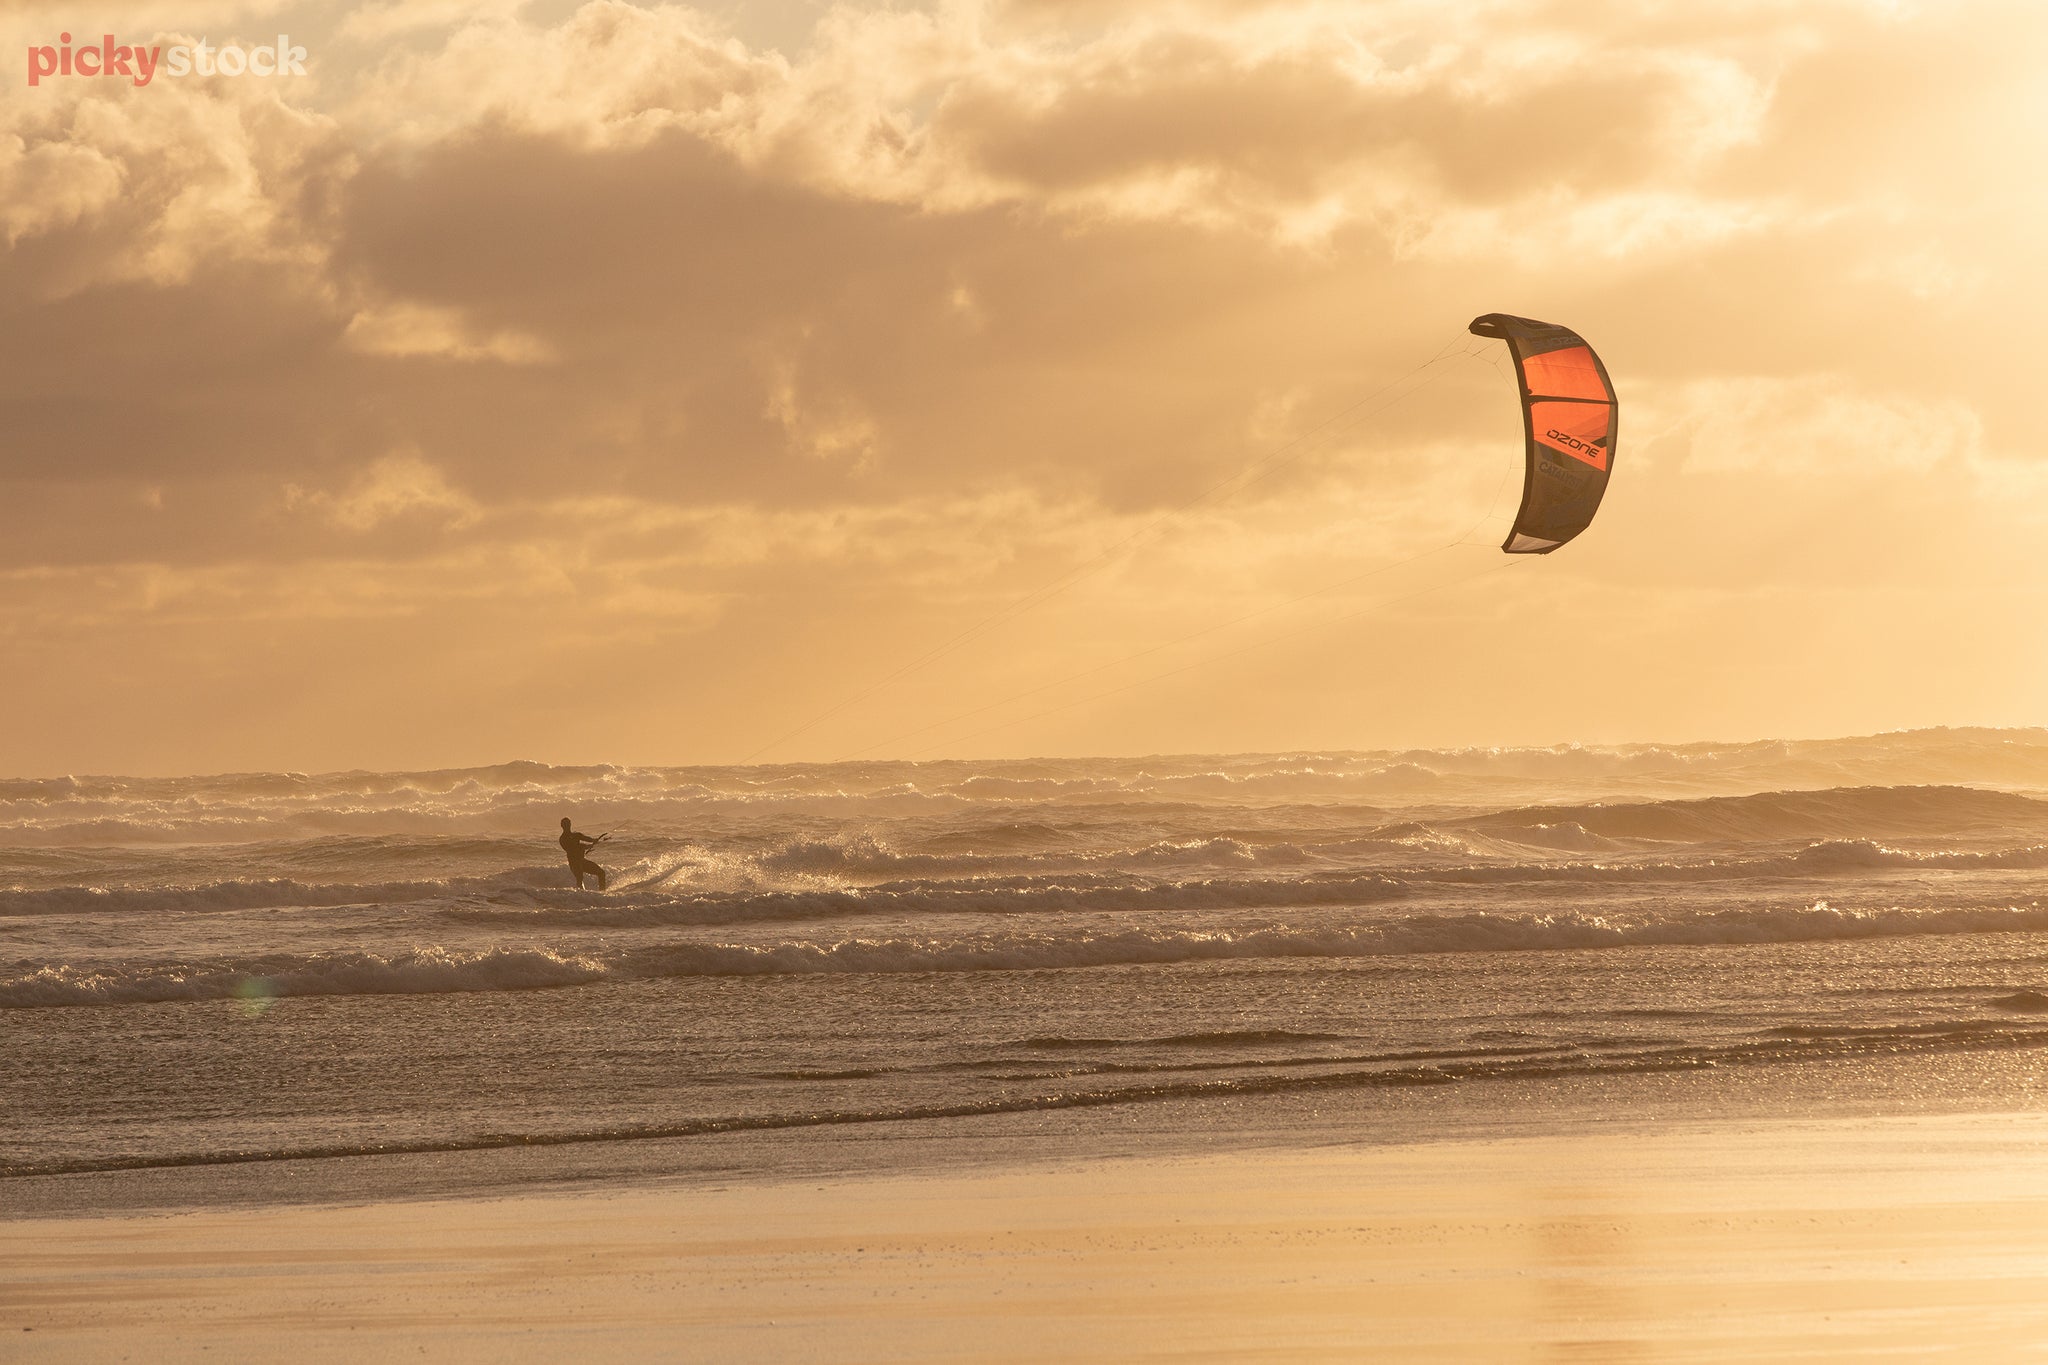 Kite-surfer holds orange kite out to the right, as the ride little waves at golden hour. 